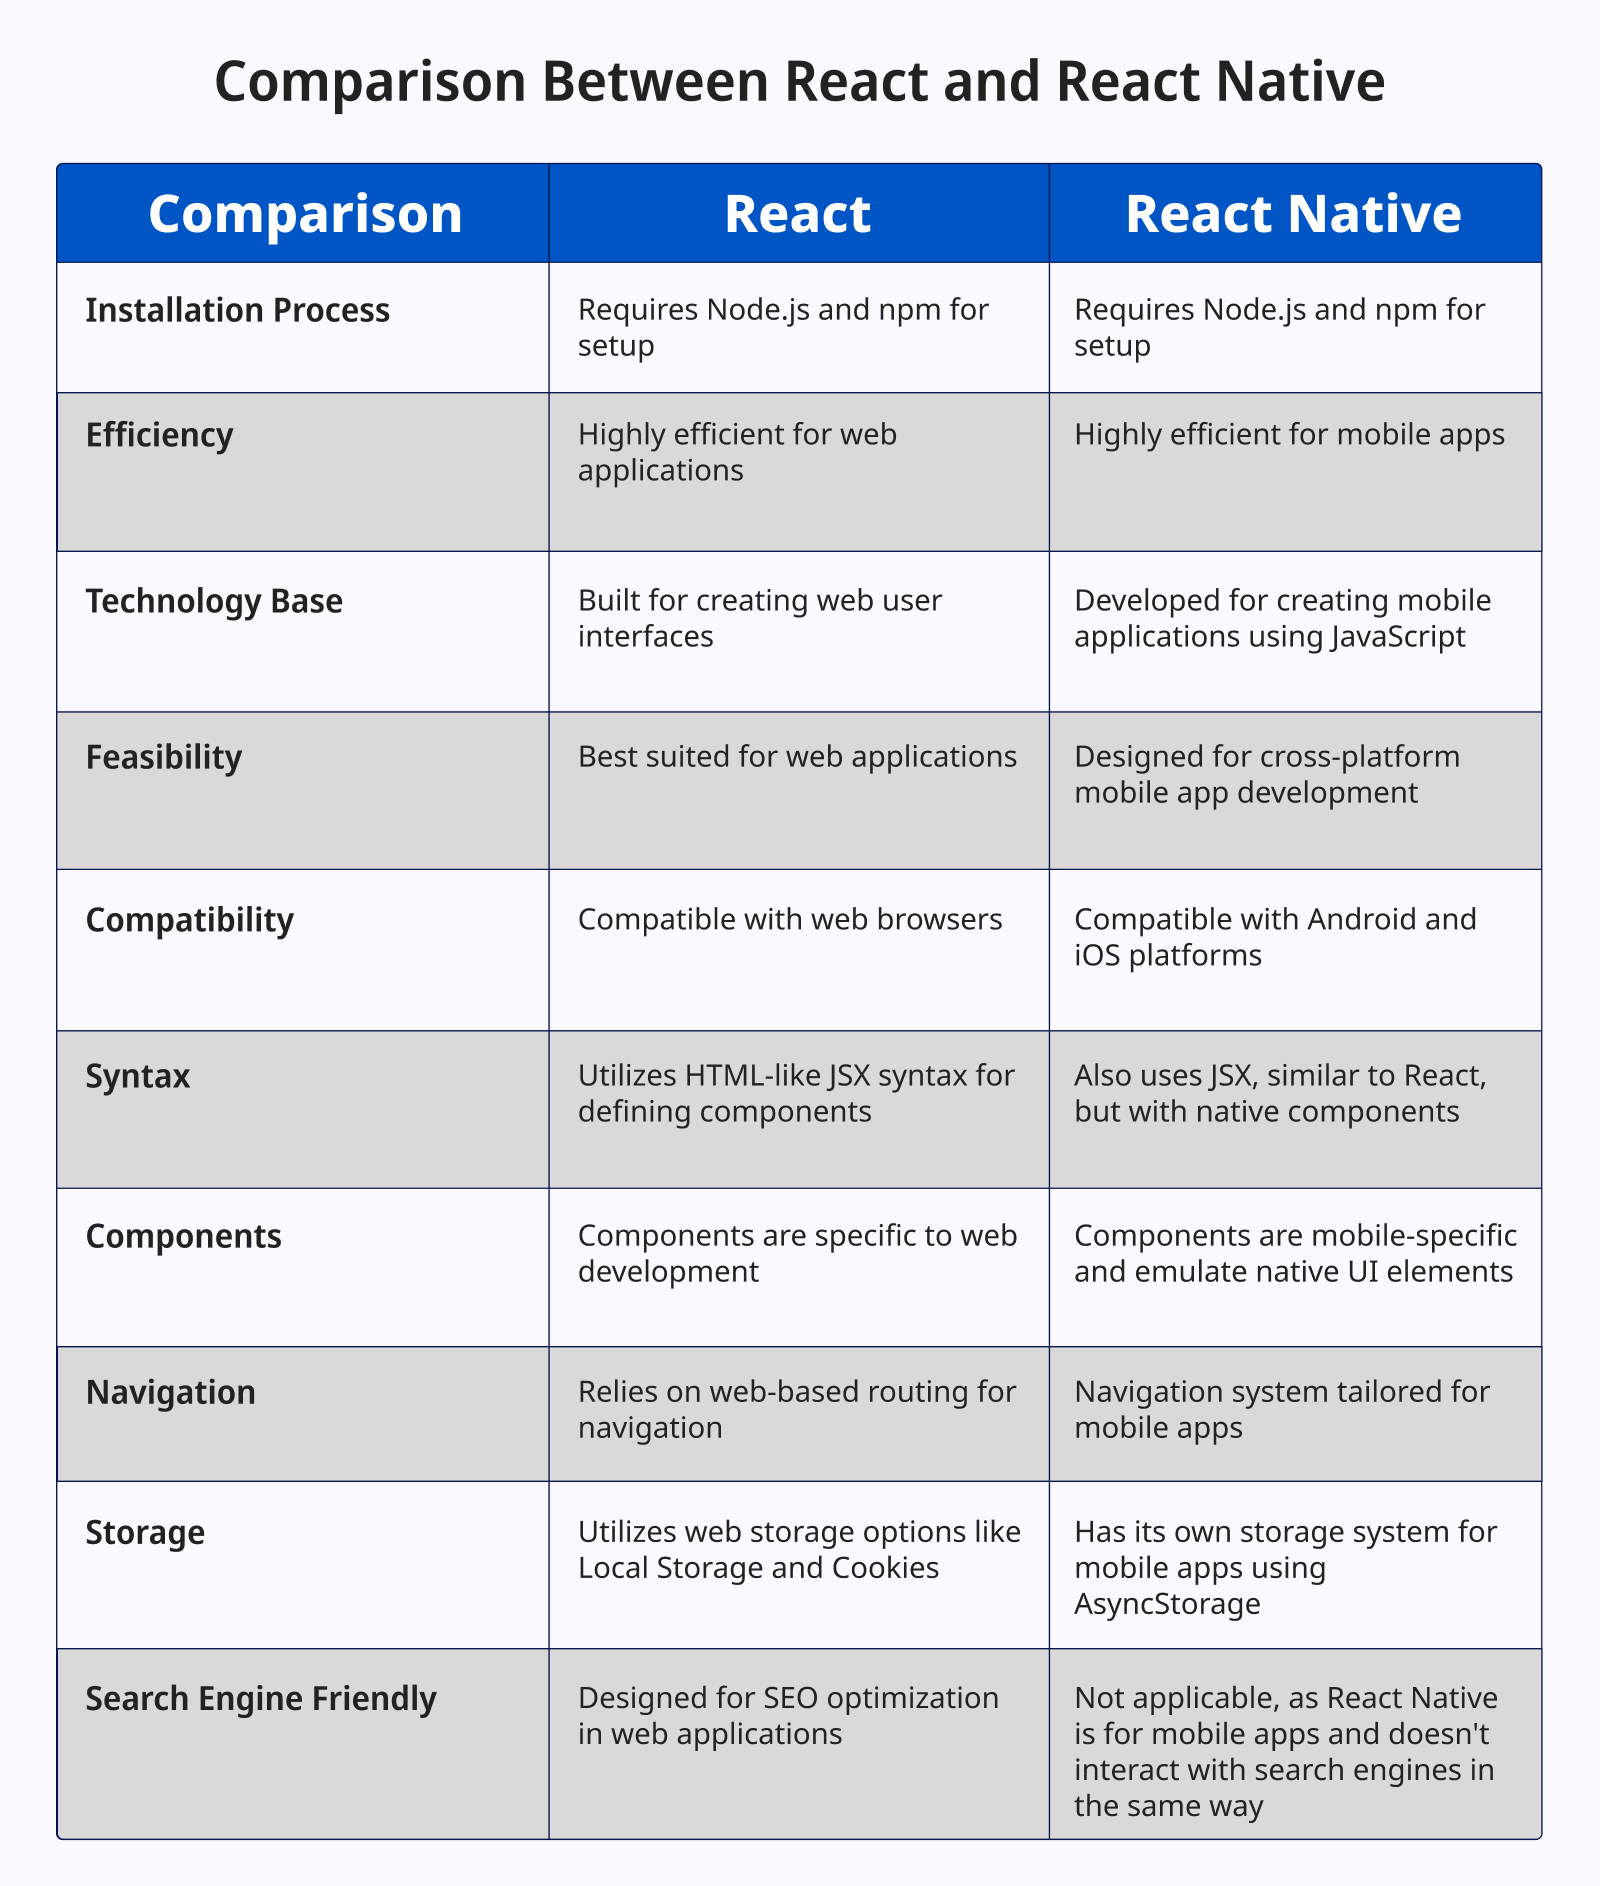 Comparison Between React and React Native